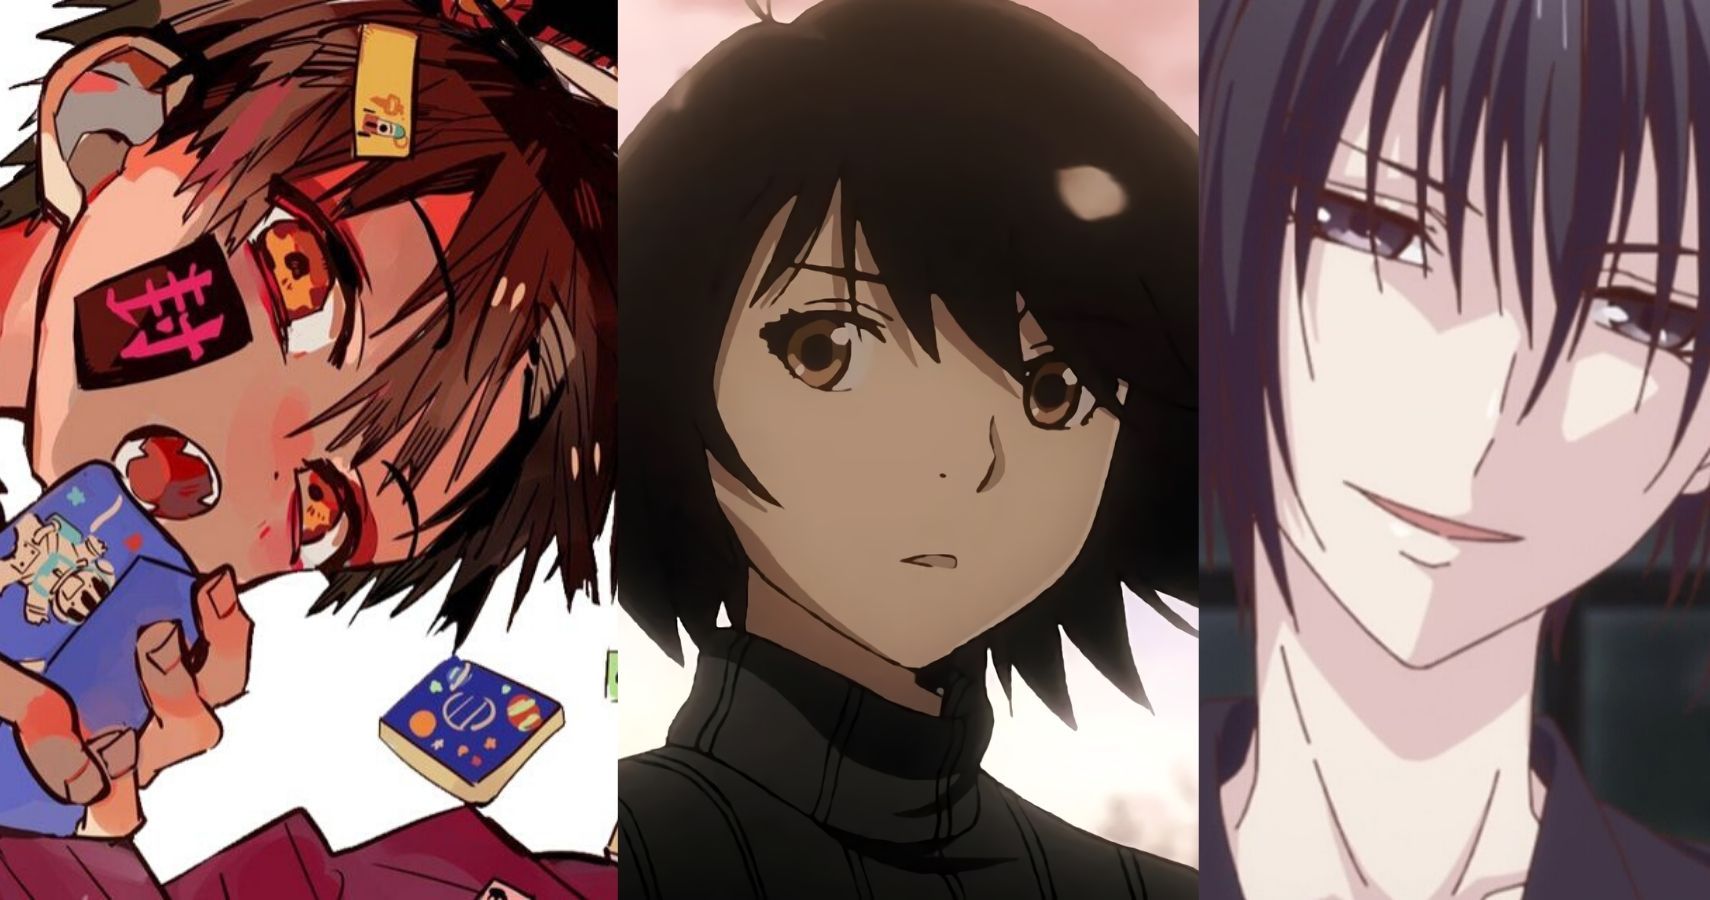 The Top 10 Most Hated Characters In 2020 Anime, Ranked | CBR